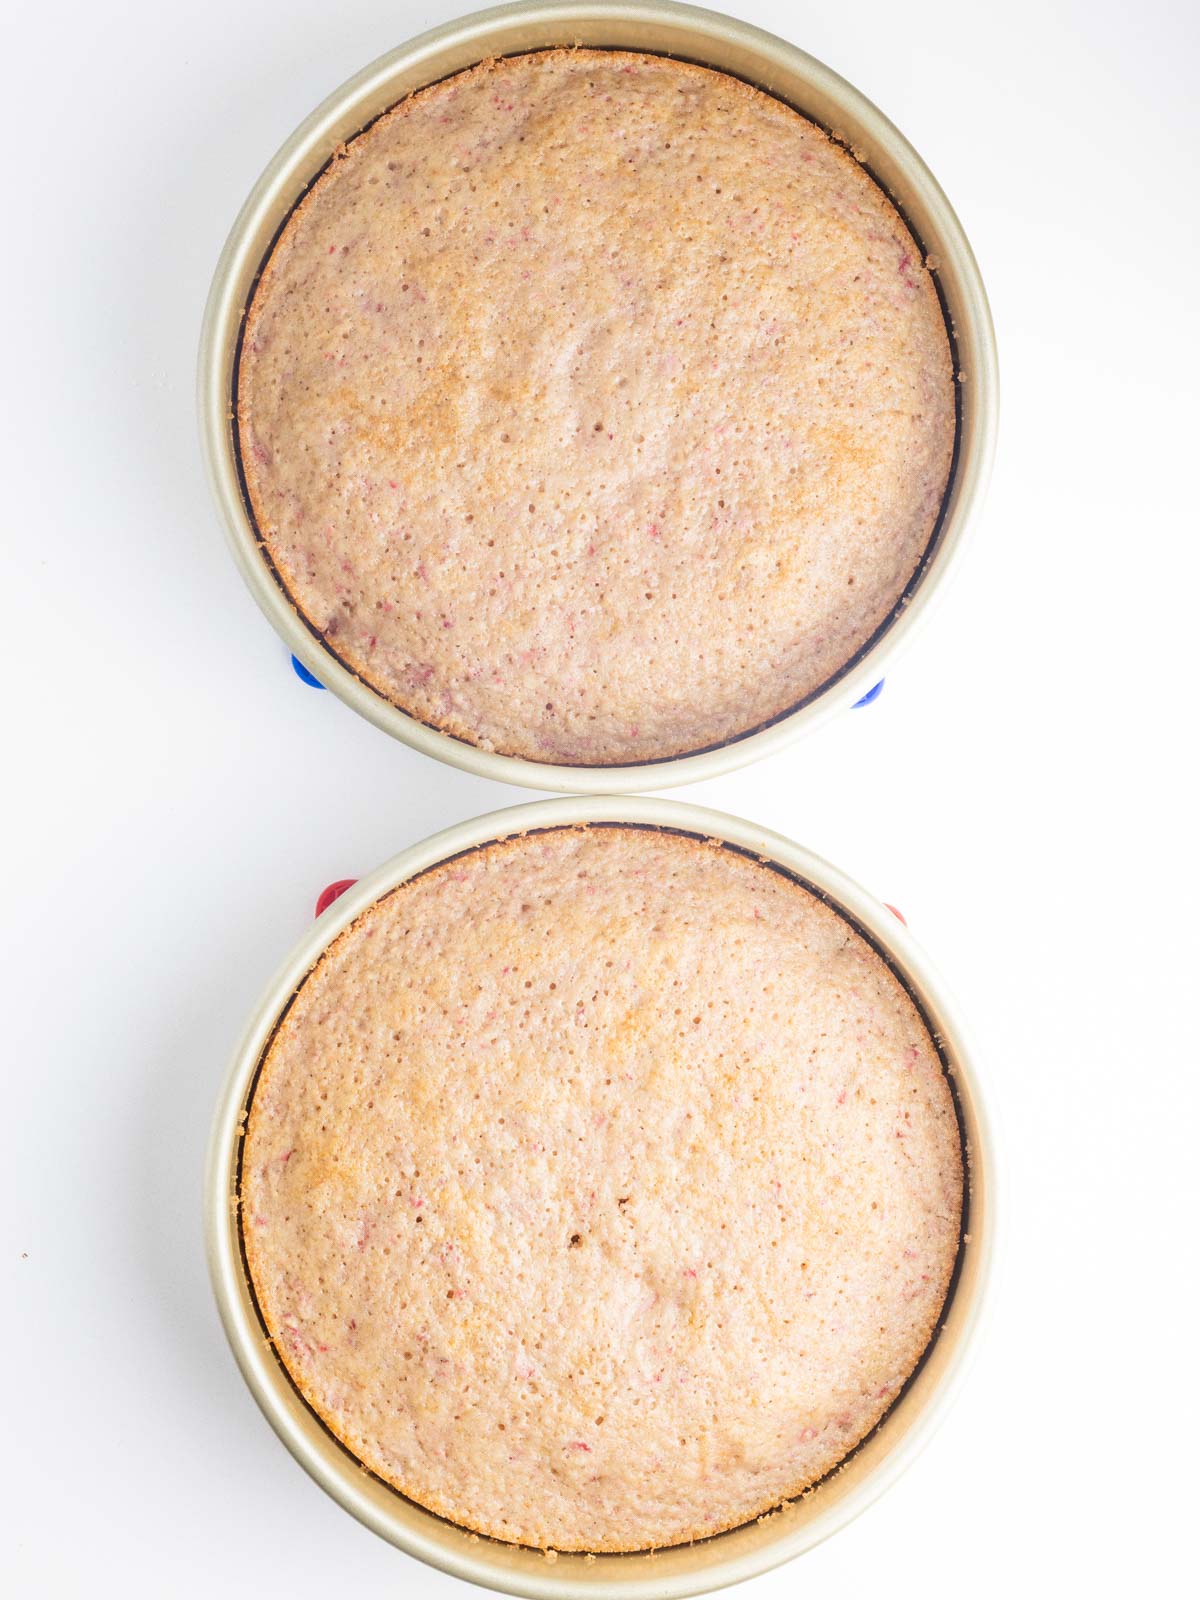 Baked strawberry cake in two cake pans lined up vertically in the frame.